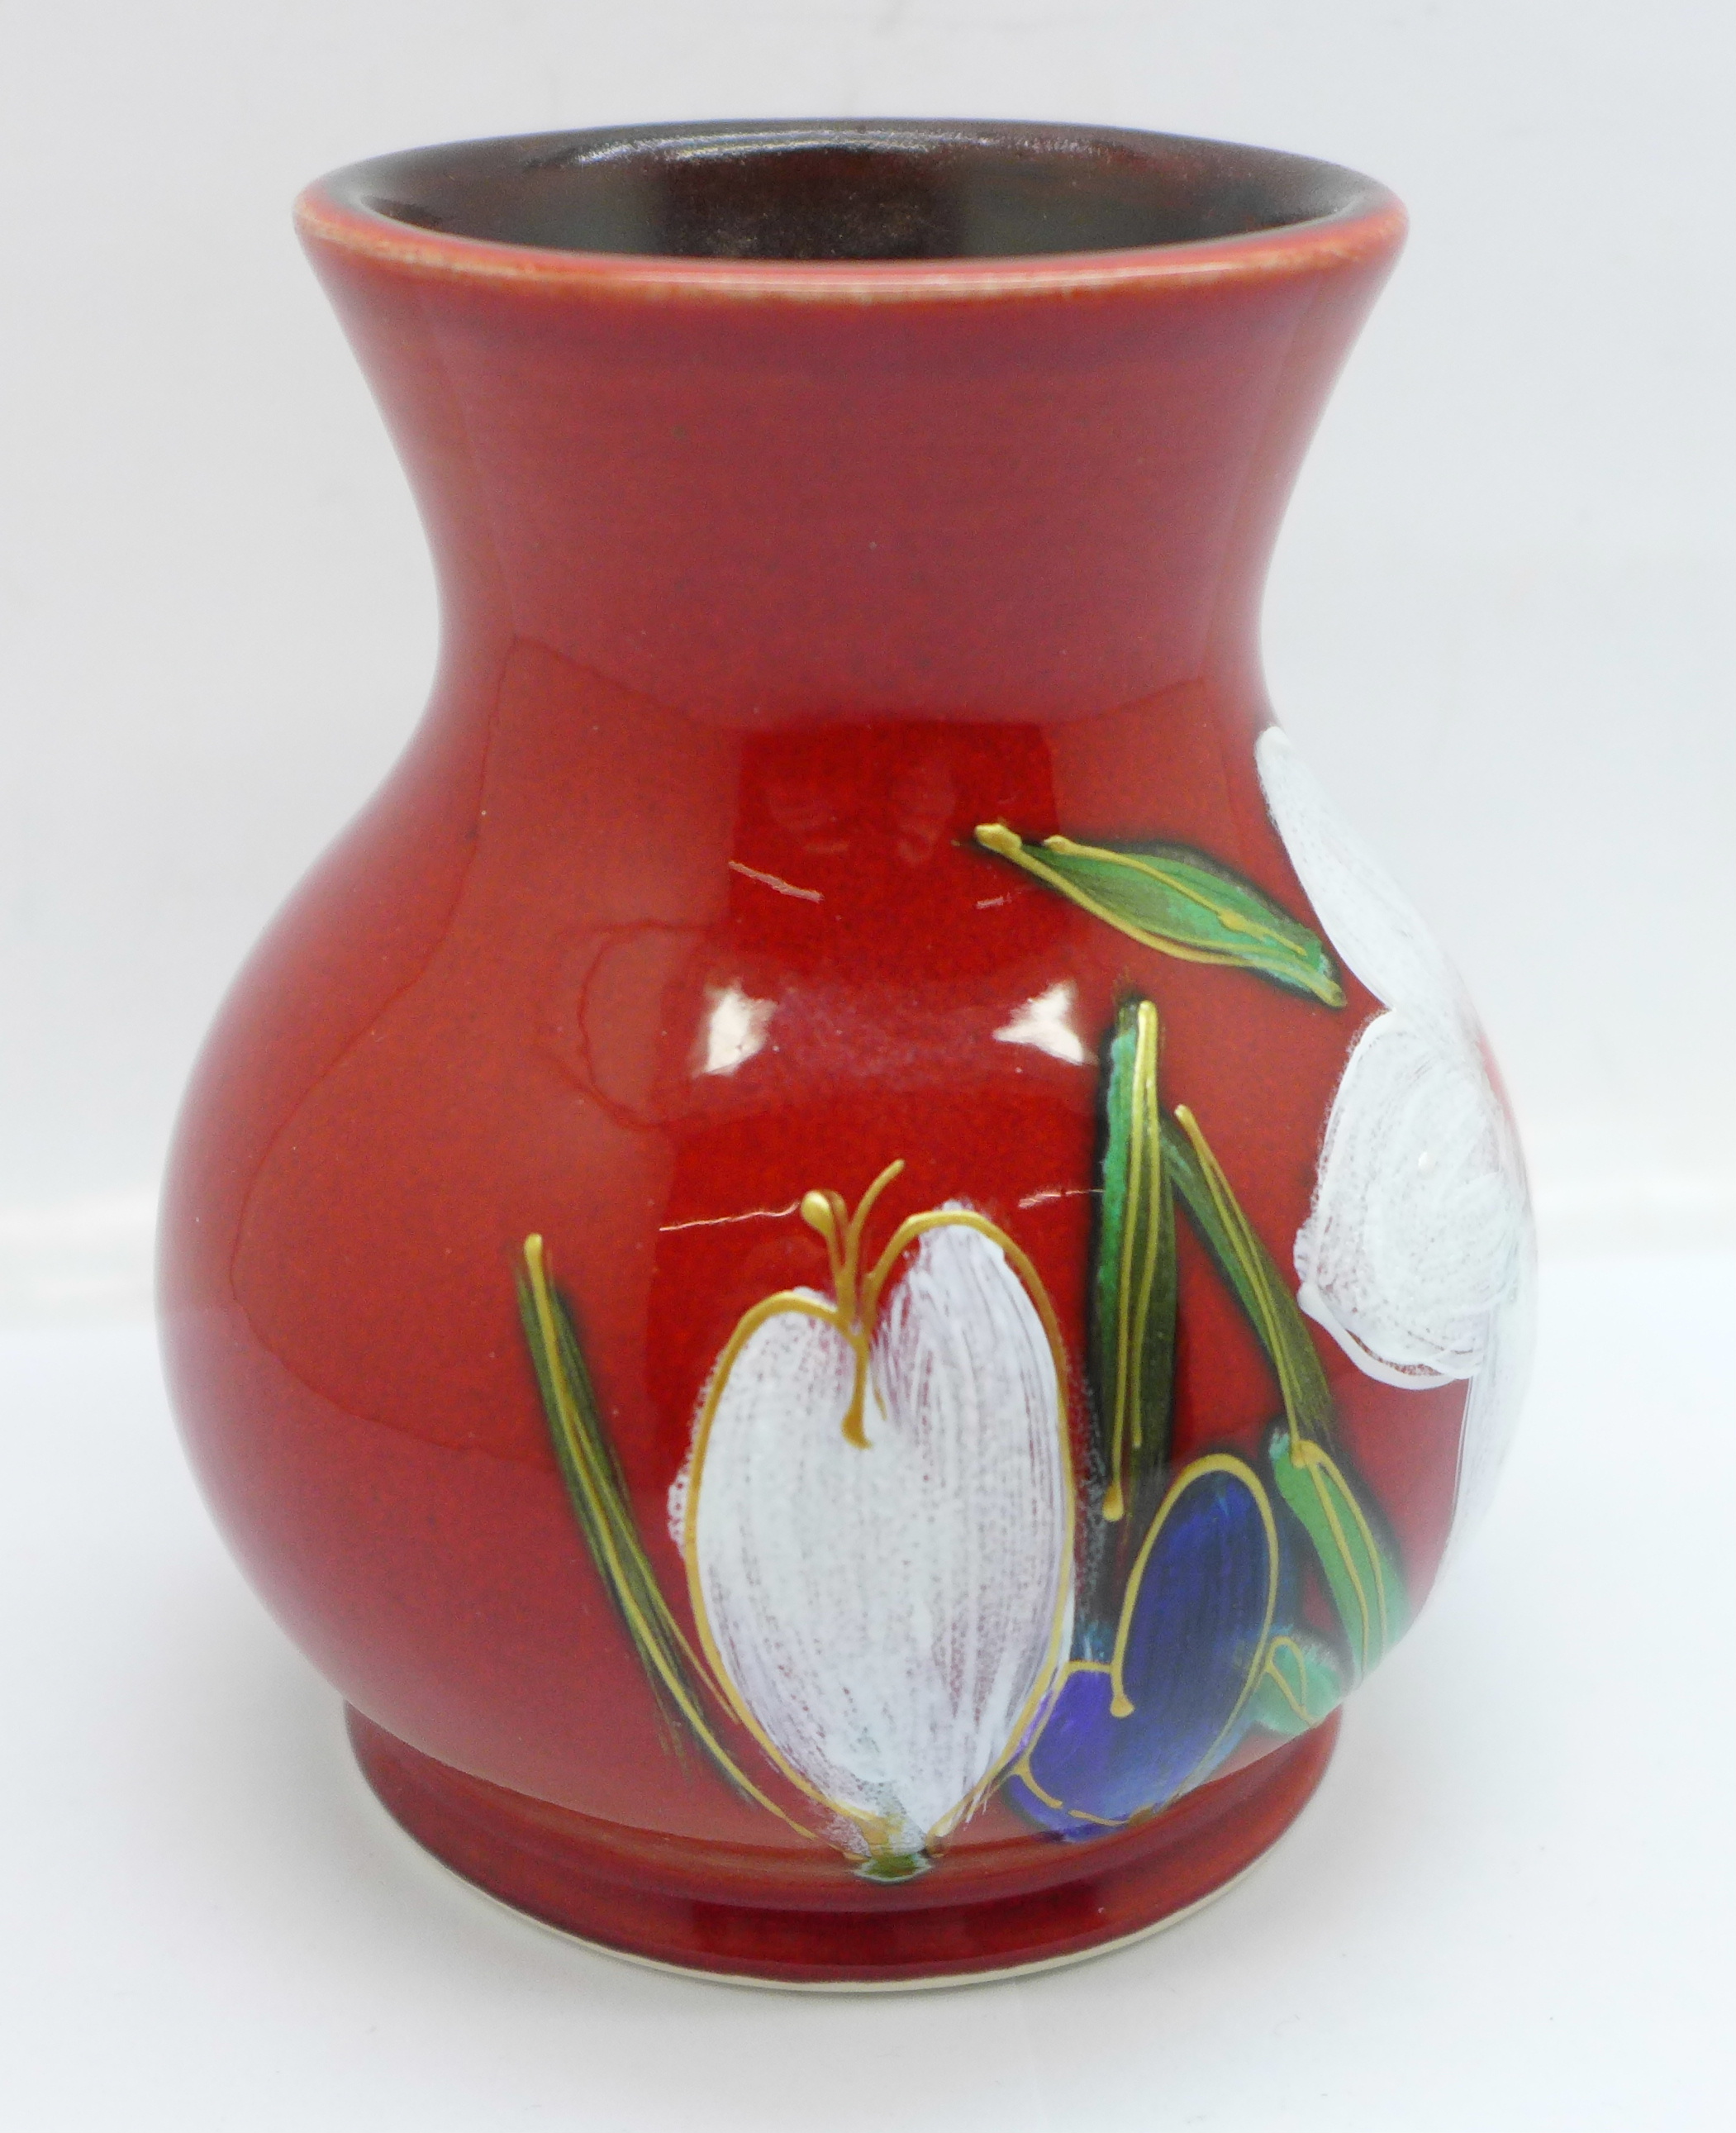 An Anita Harris trojan vase in the Spring Flowers design, signed in gold on the base, 11cm - Image 2 of 6